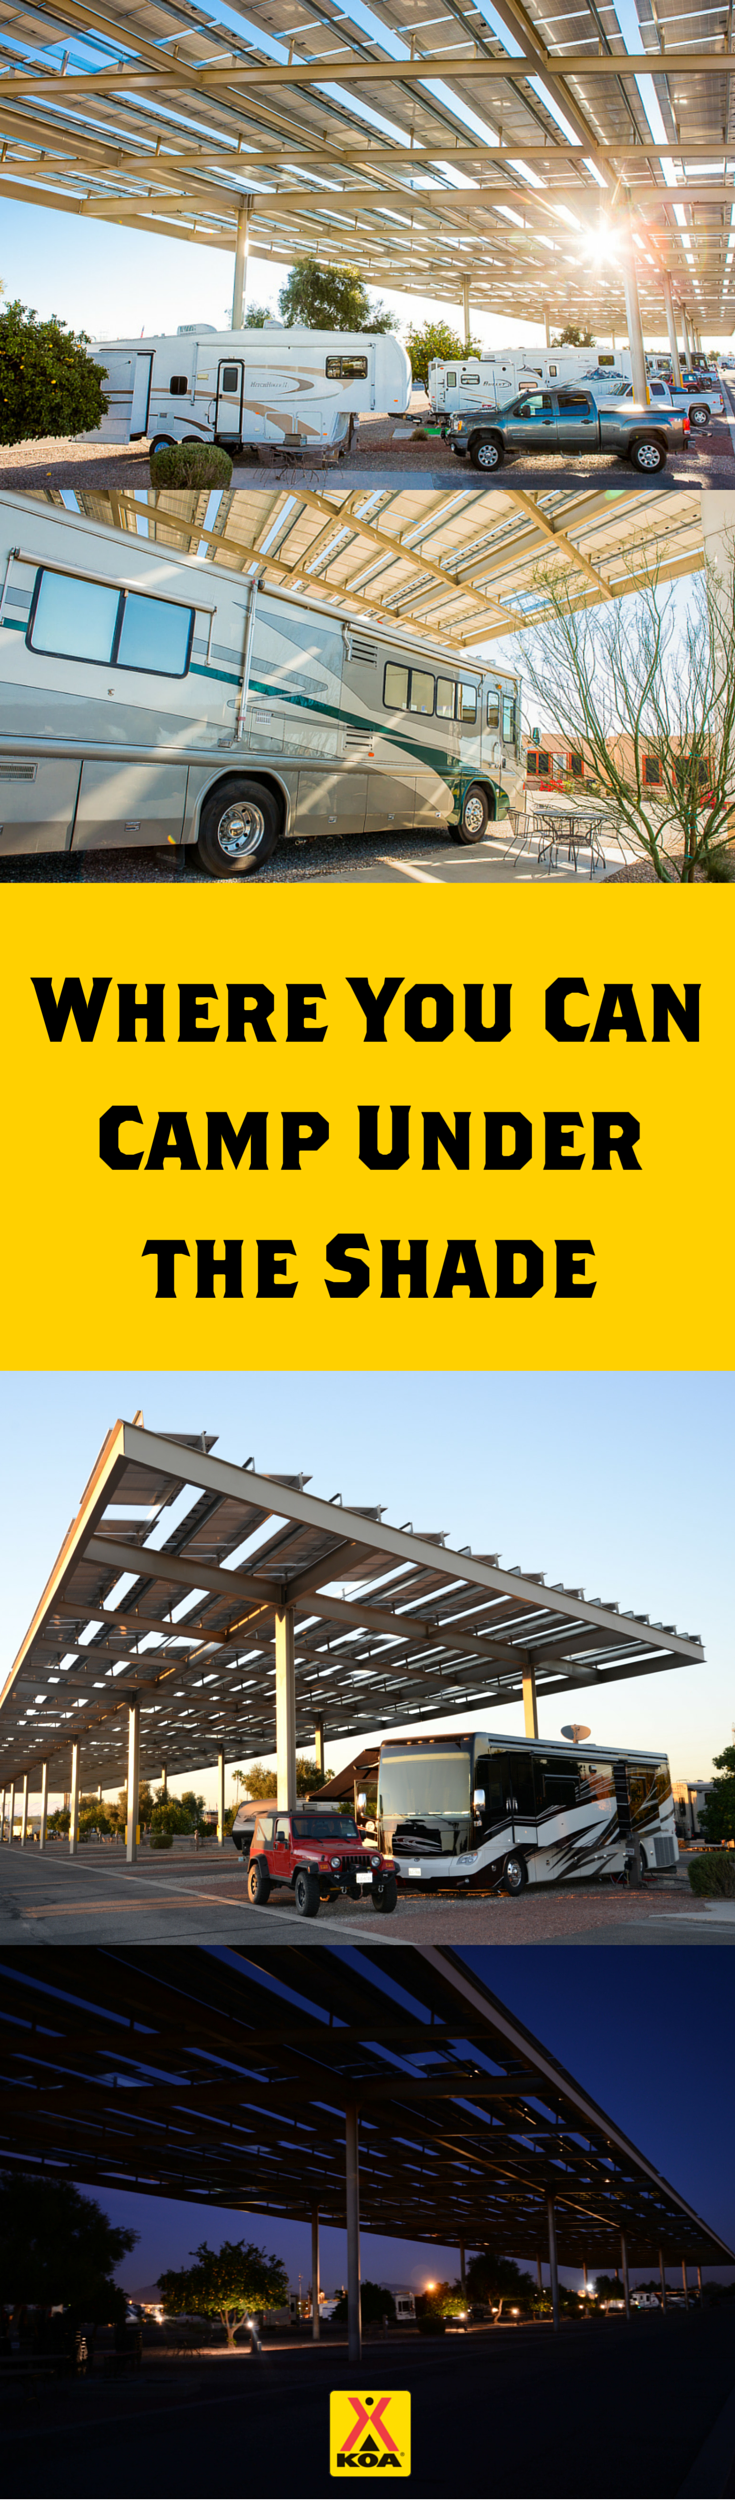 Do you dream about camping in the desert? Here's a campground where you can park your RV under a shade structure.